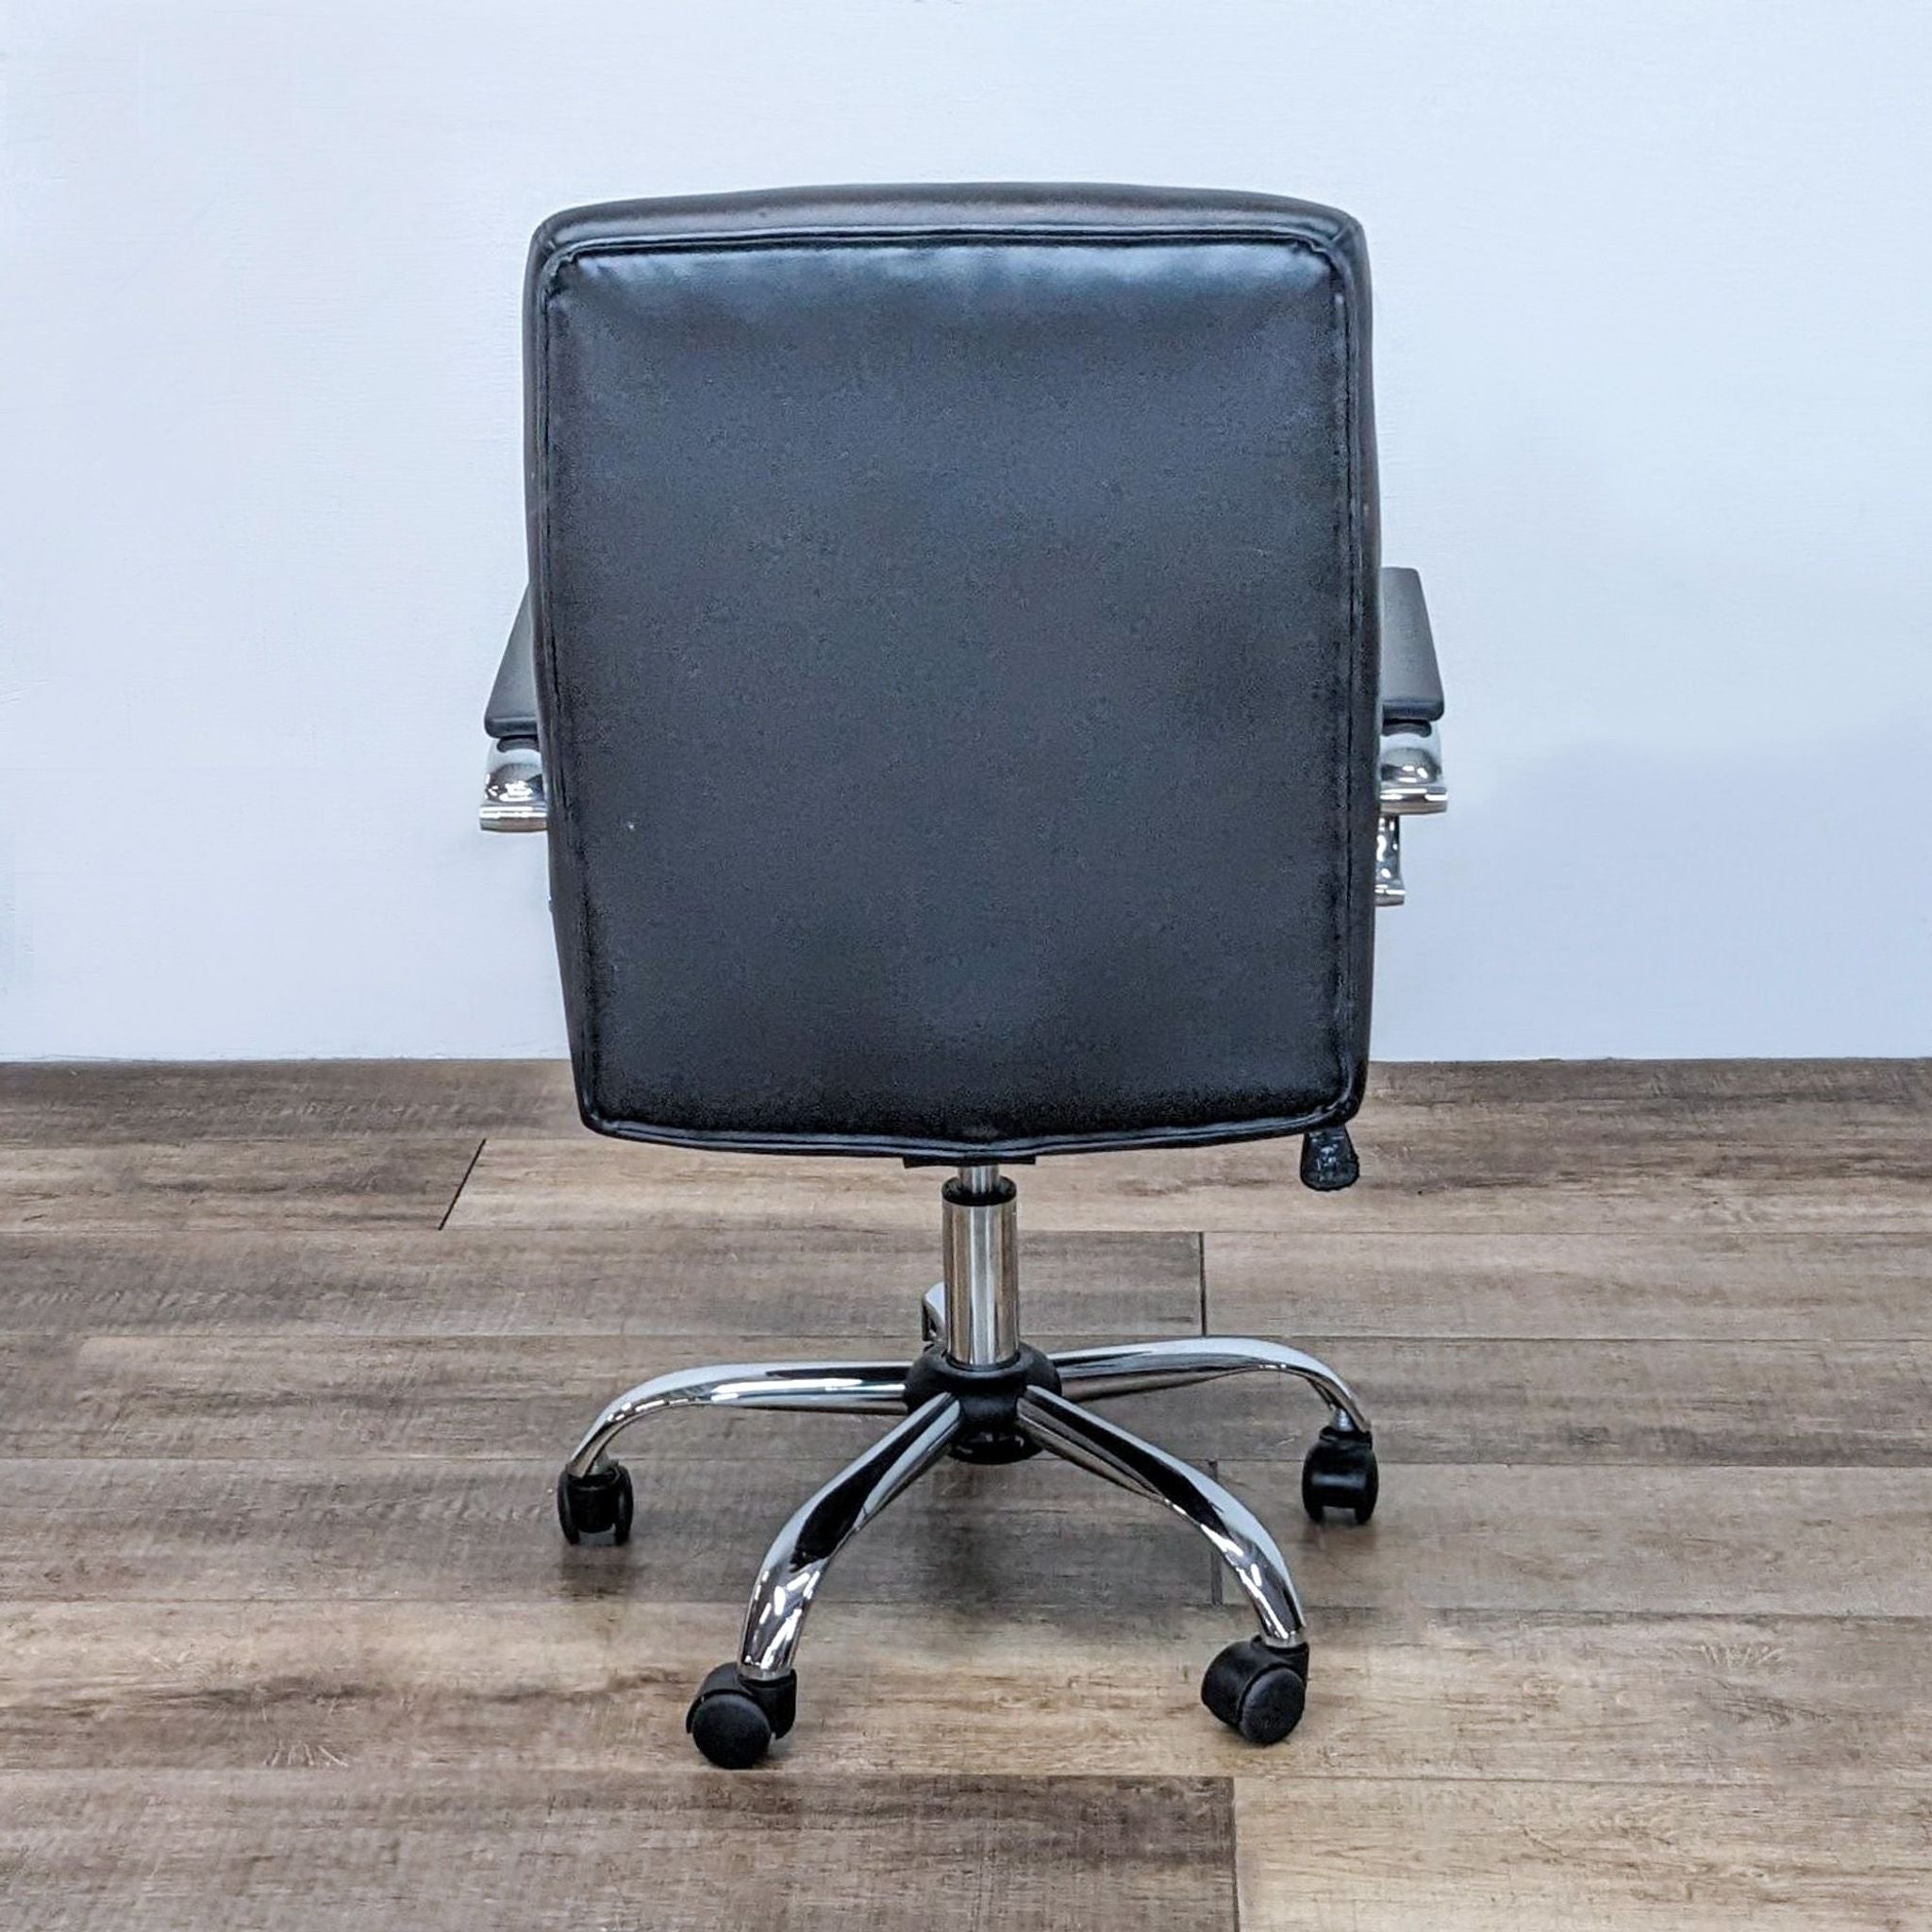 Reperch faux leather mid-back office chair with chrome arms, a 360° swivel seat, tilt-lock, and adjustable height on wheels.